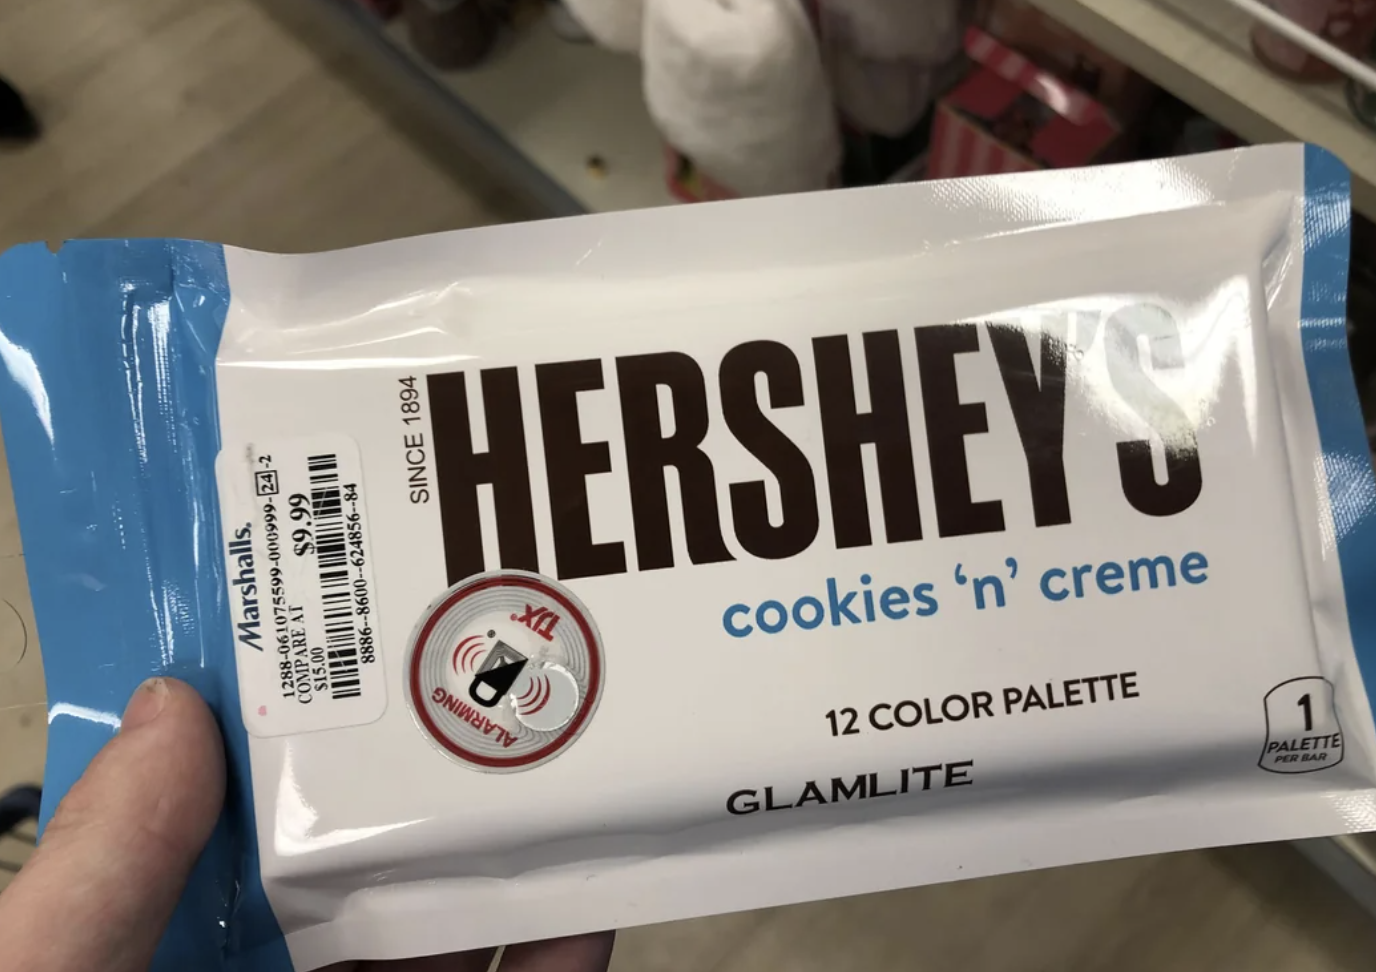 A package of Hershey&#x27;s brand cookies &#x27;n&#x27; creme 12-color palette